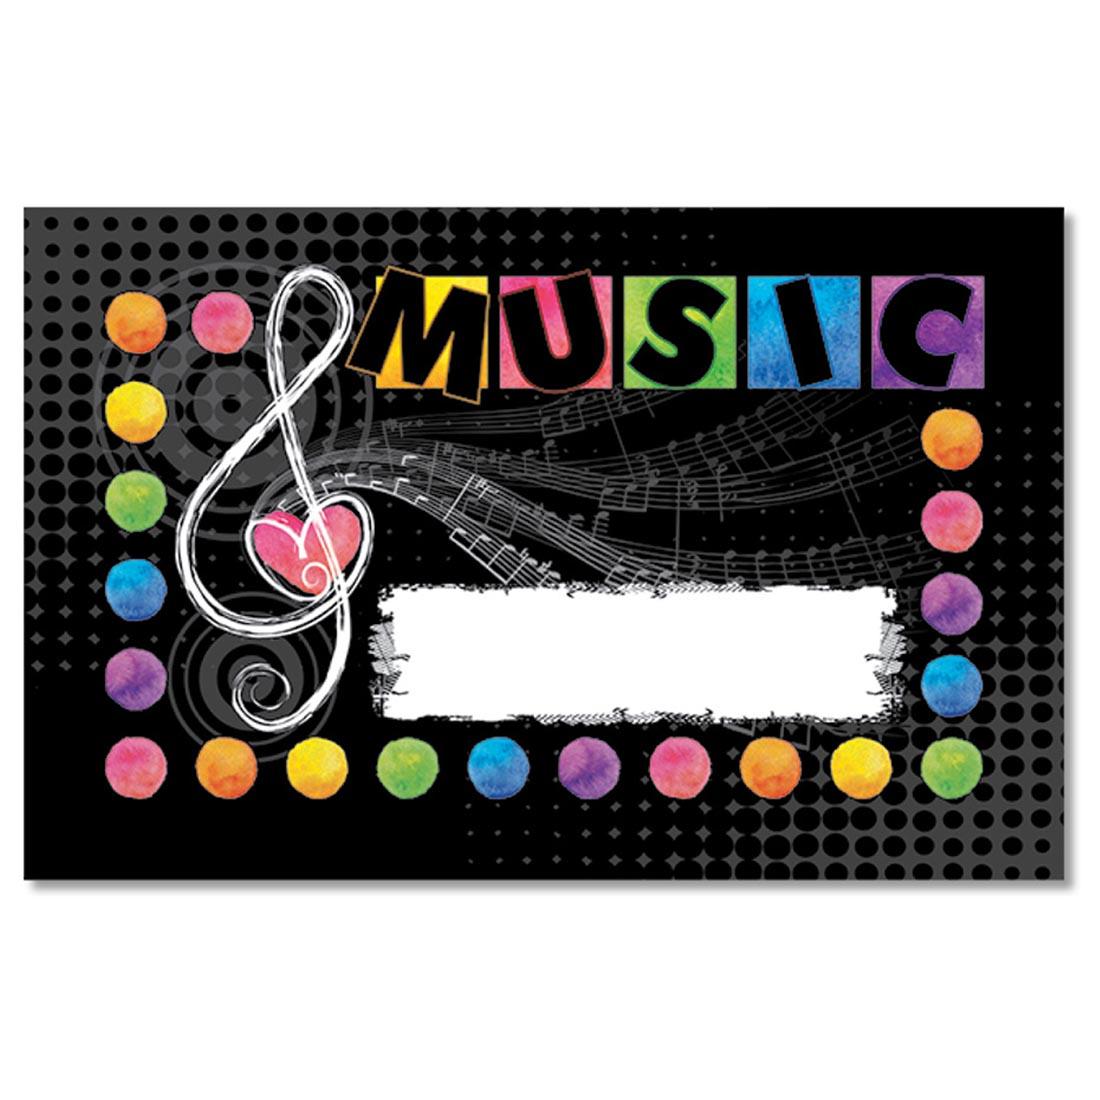 Incentive Punch Cards with musical decorations